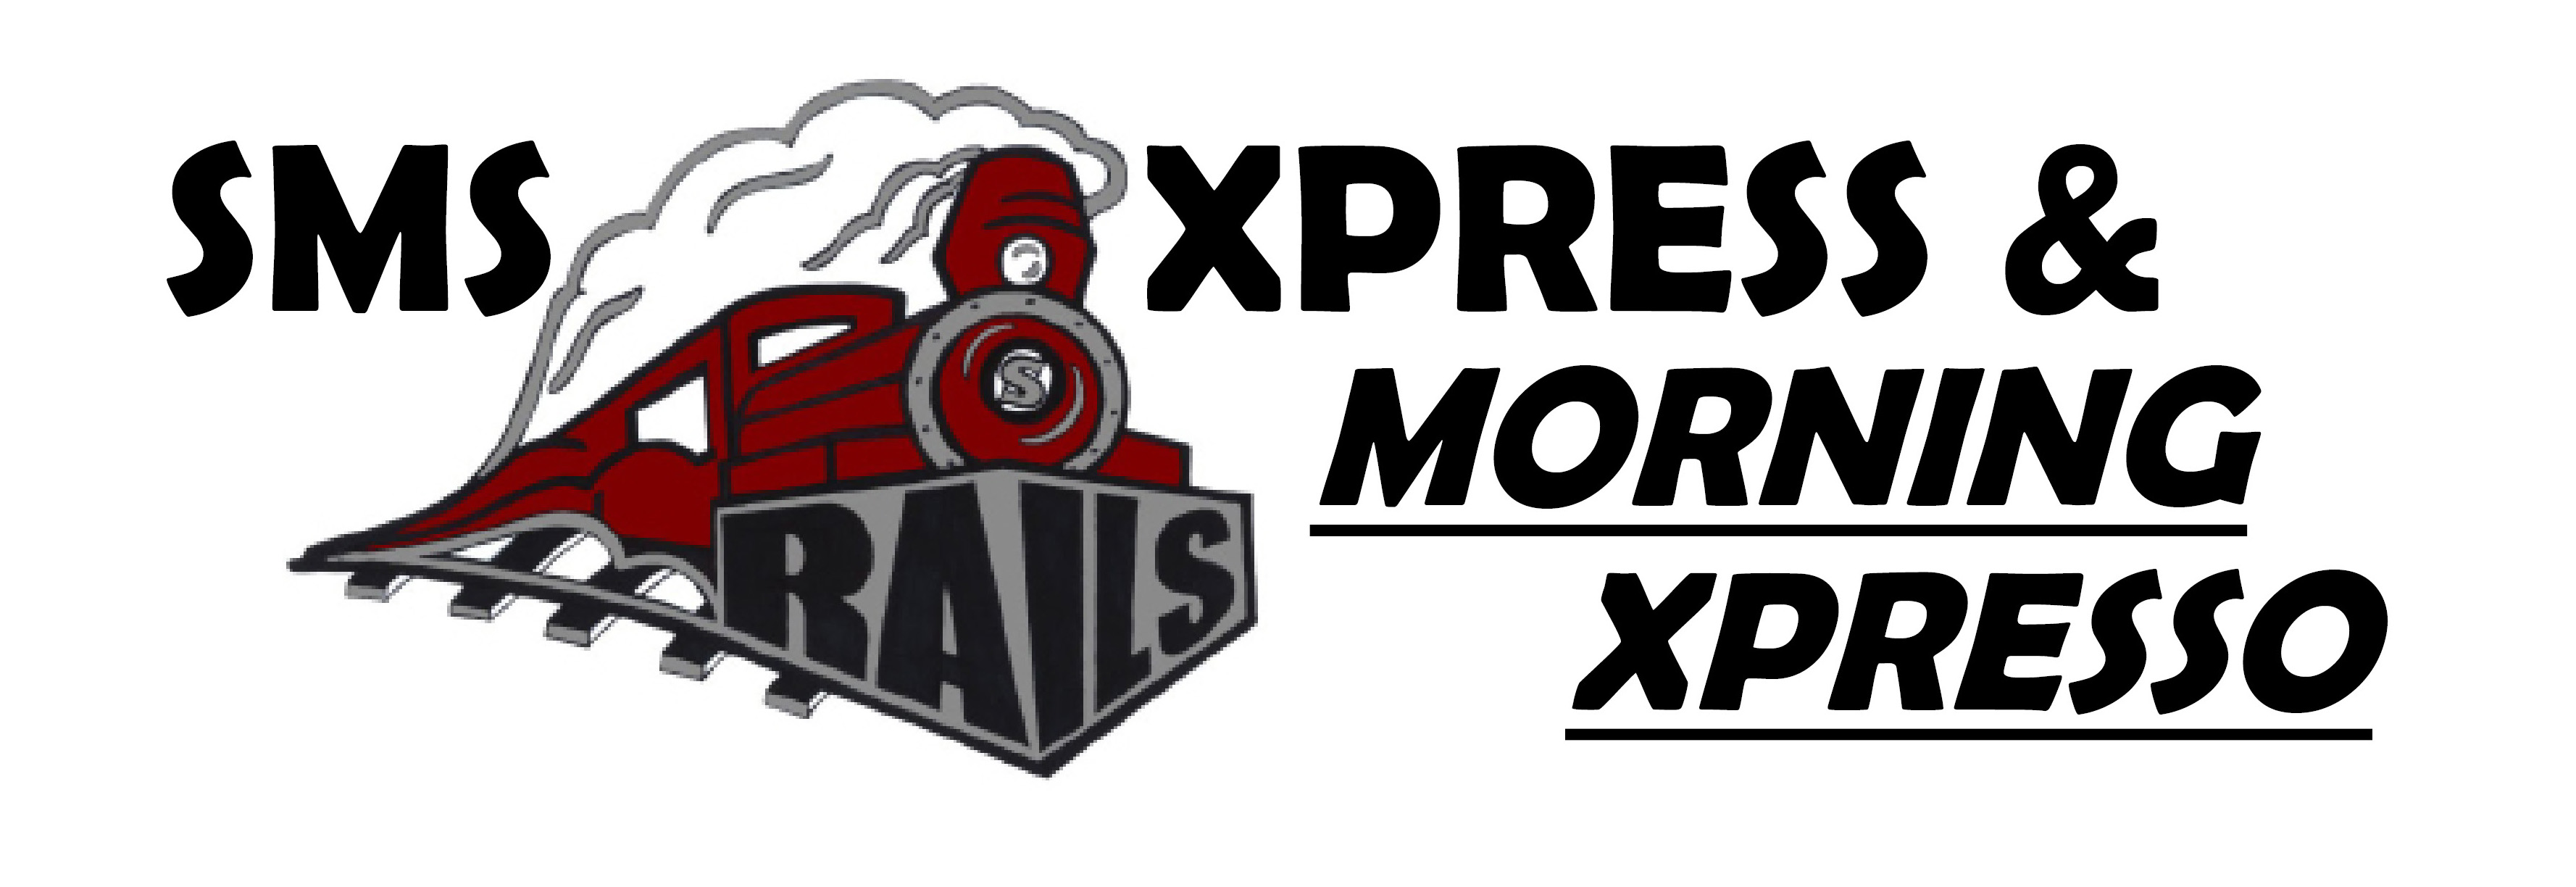 SMS Express & Morning Xpresso